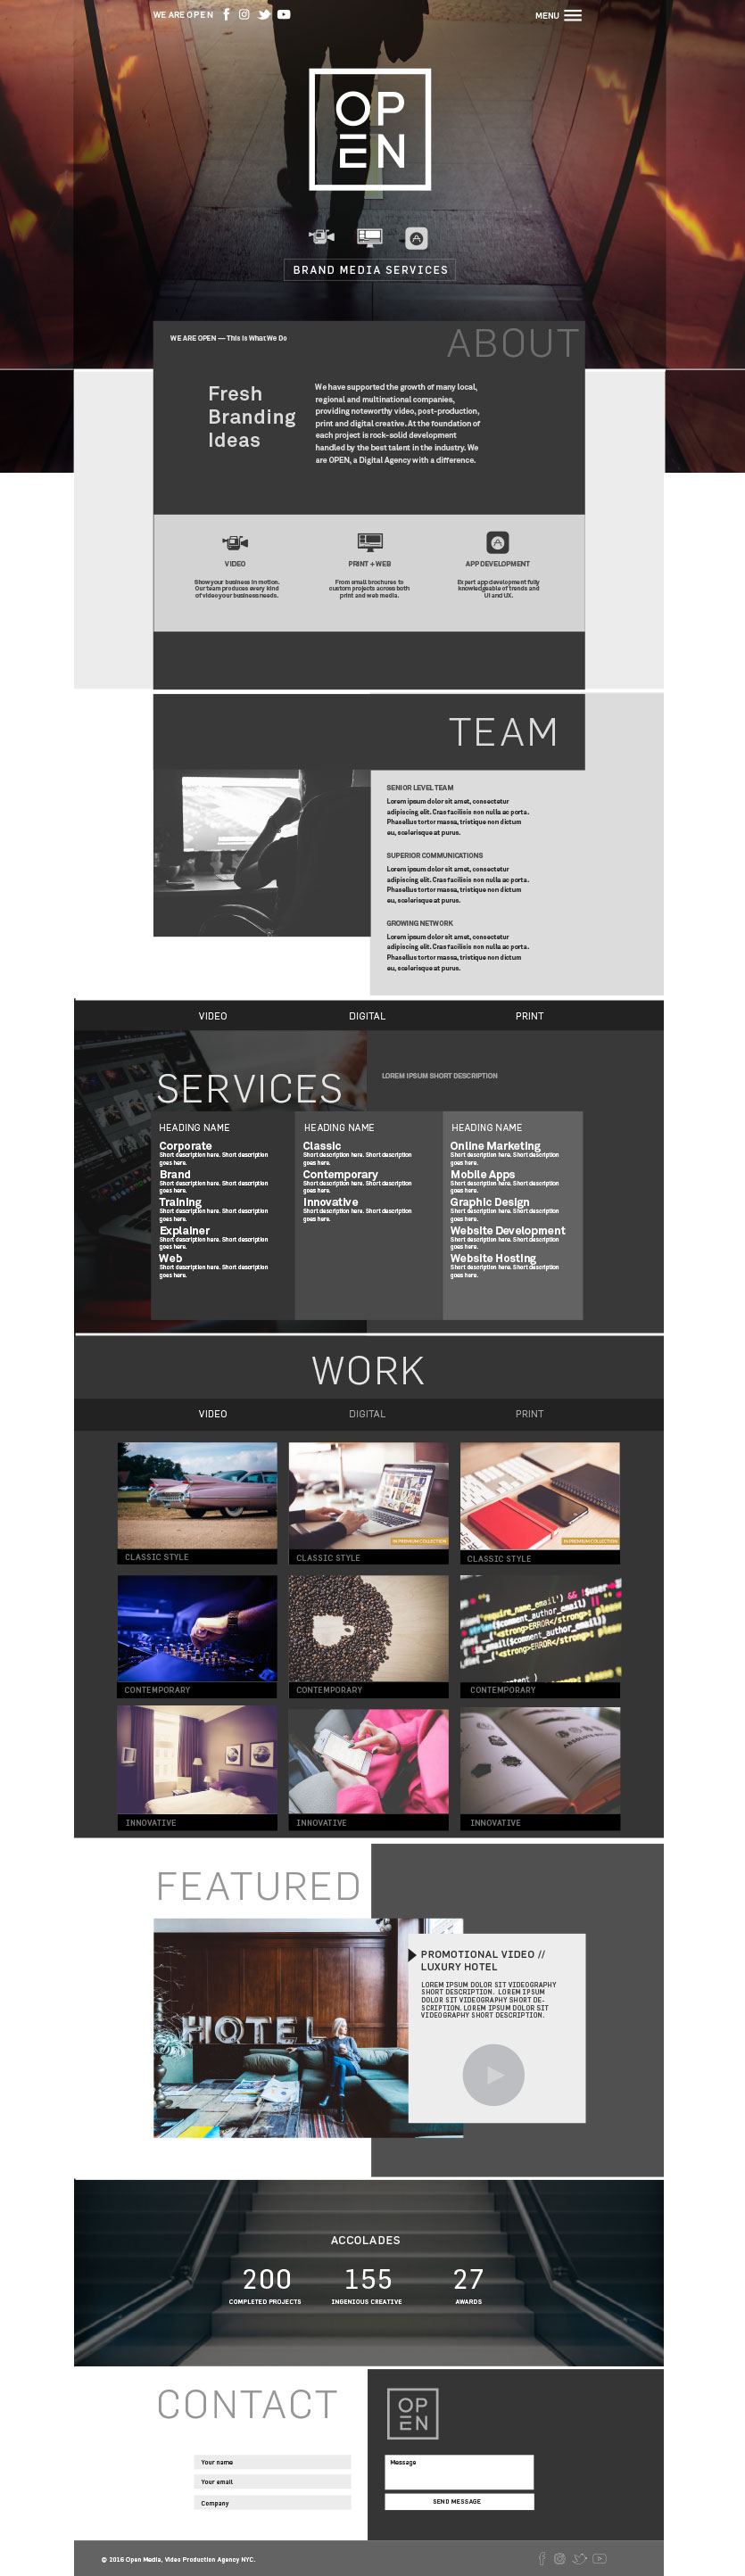 Web Design for Start-up Company